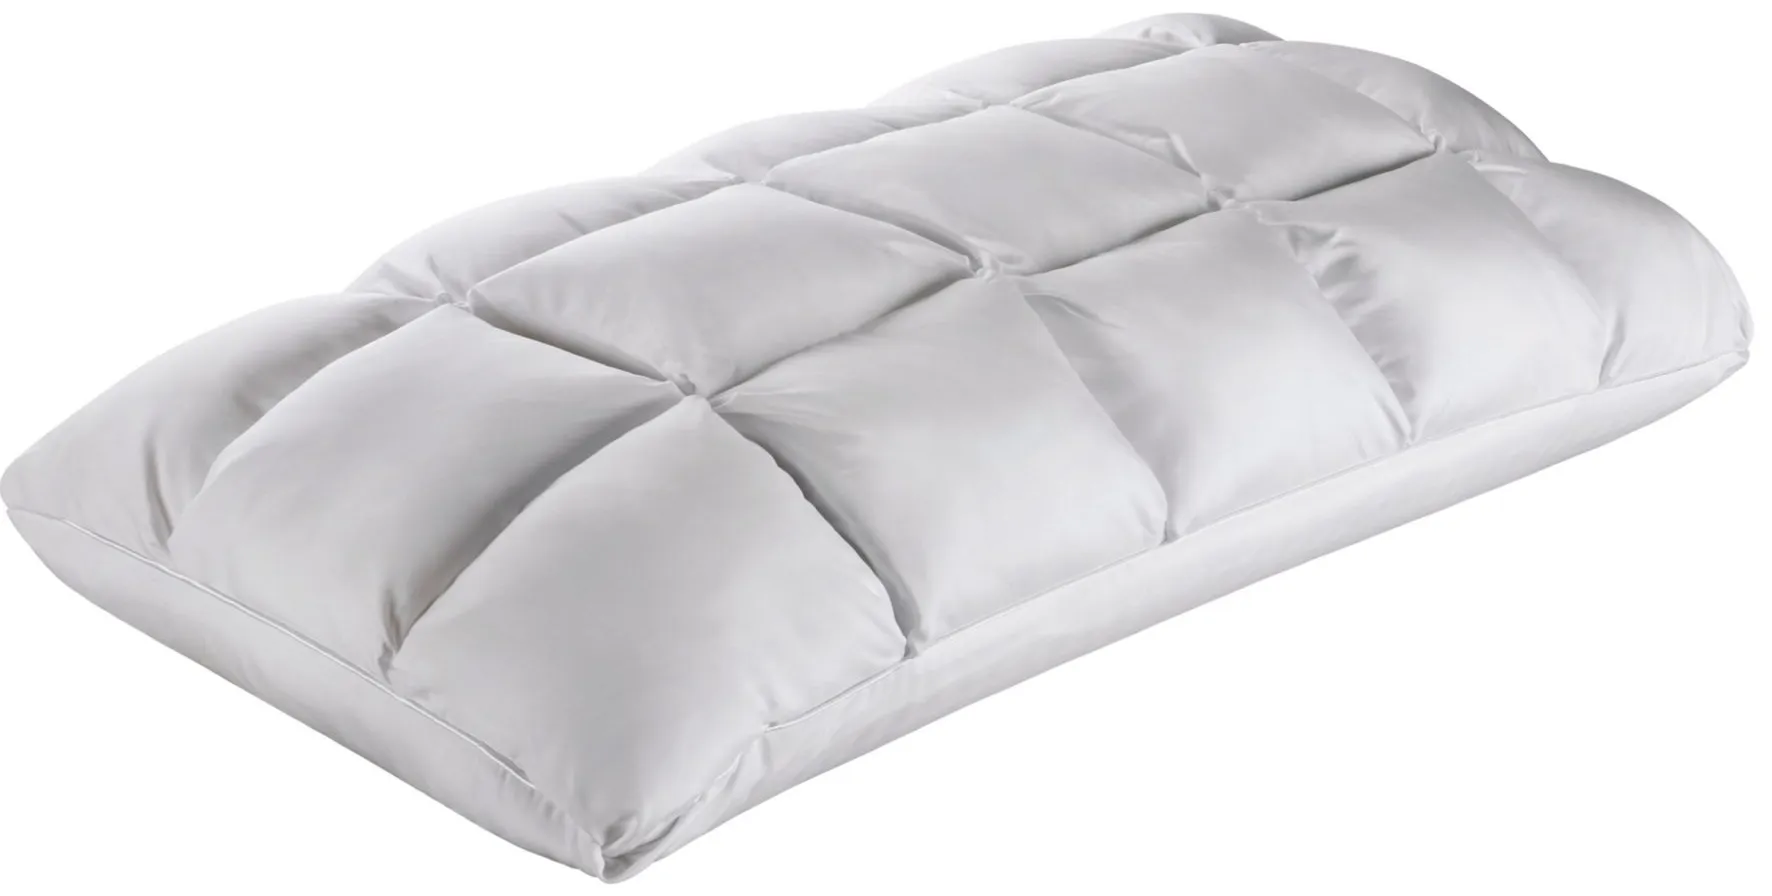 PureCare Cooling SoftCell Chill Latex Pillow - Standard in White by PureCare